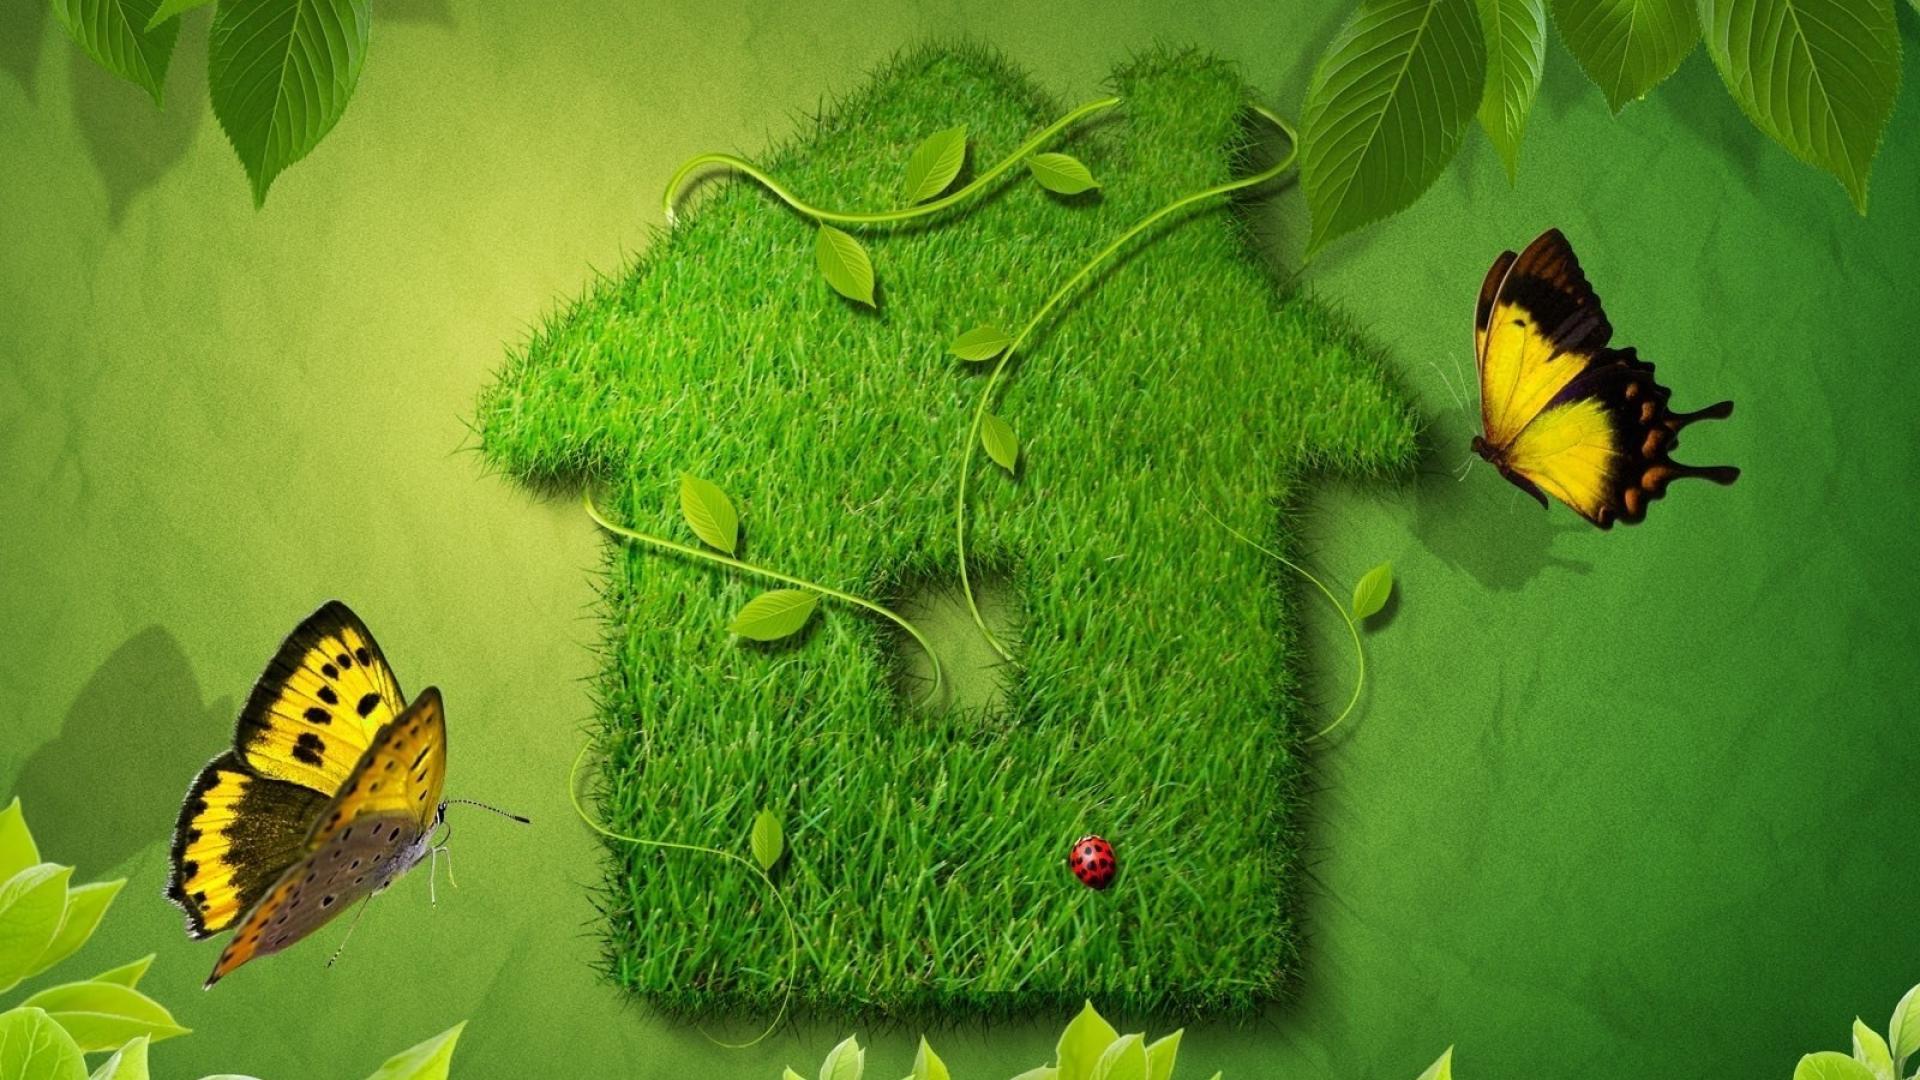 Houses complex magazine ecology natural wallpaper